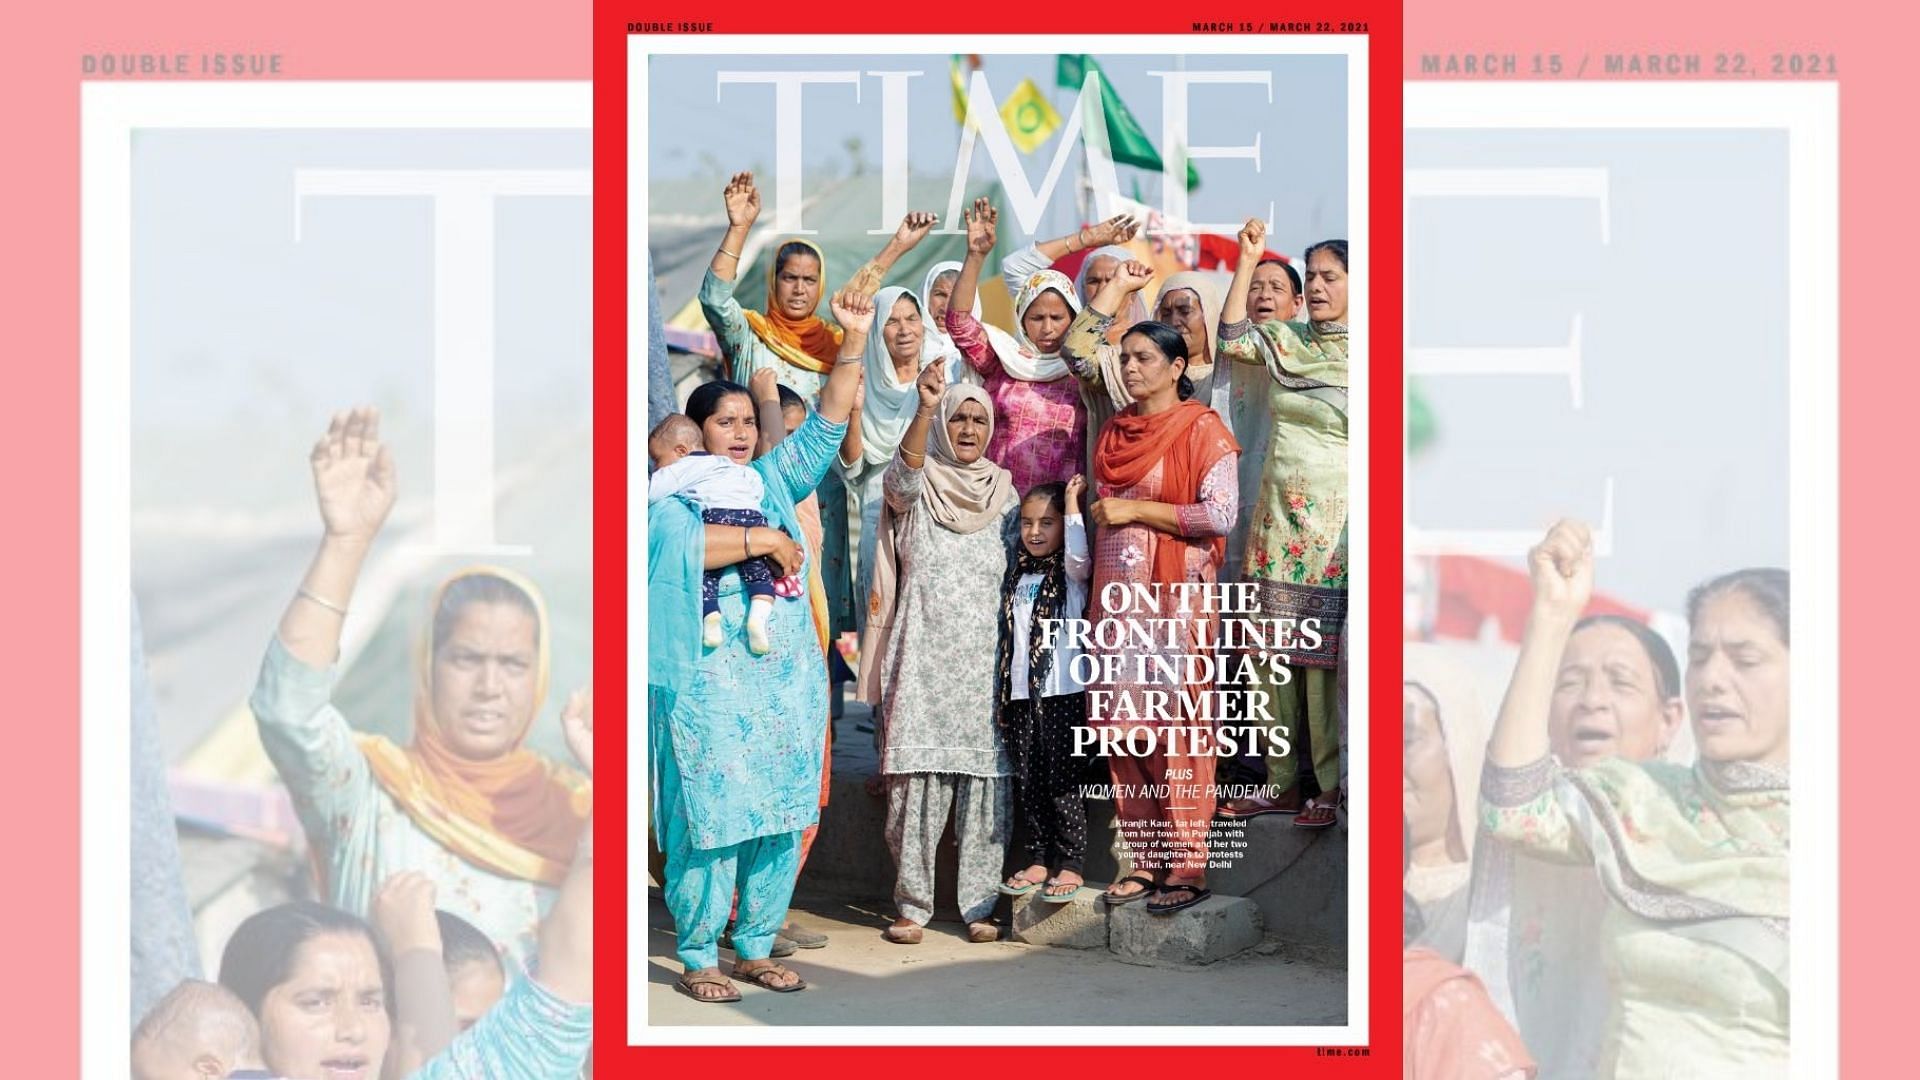 The cover photo titled ‘On the Frontlines of India’s Farmer Protest’ captures a group of 20 women at Tikri border on the outskirts of Delhi.